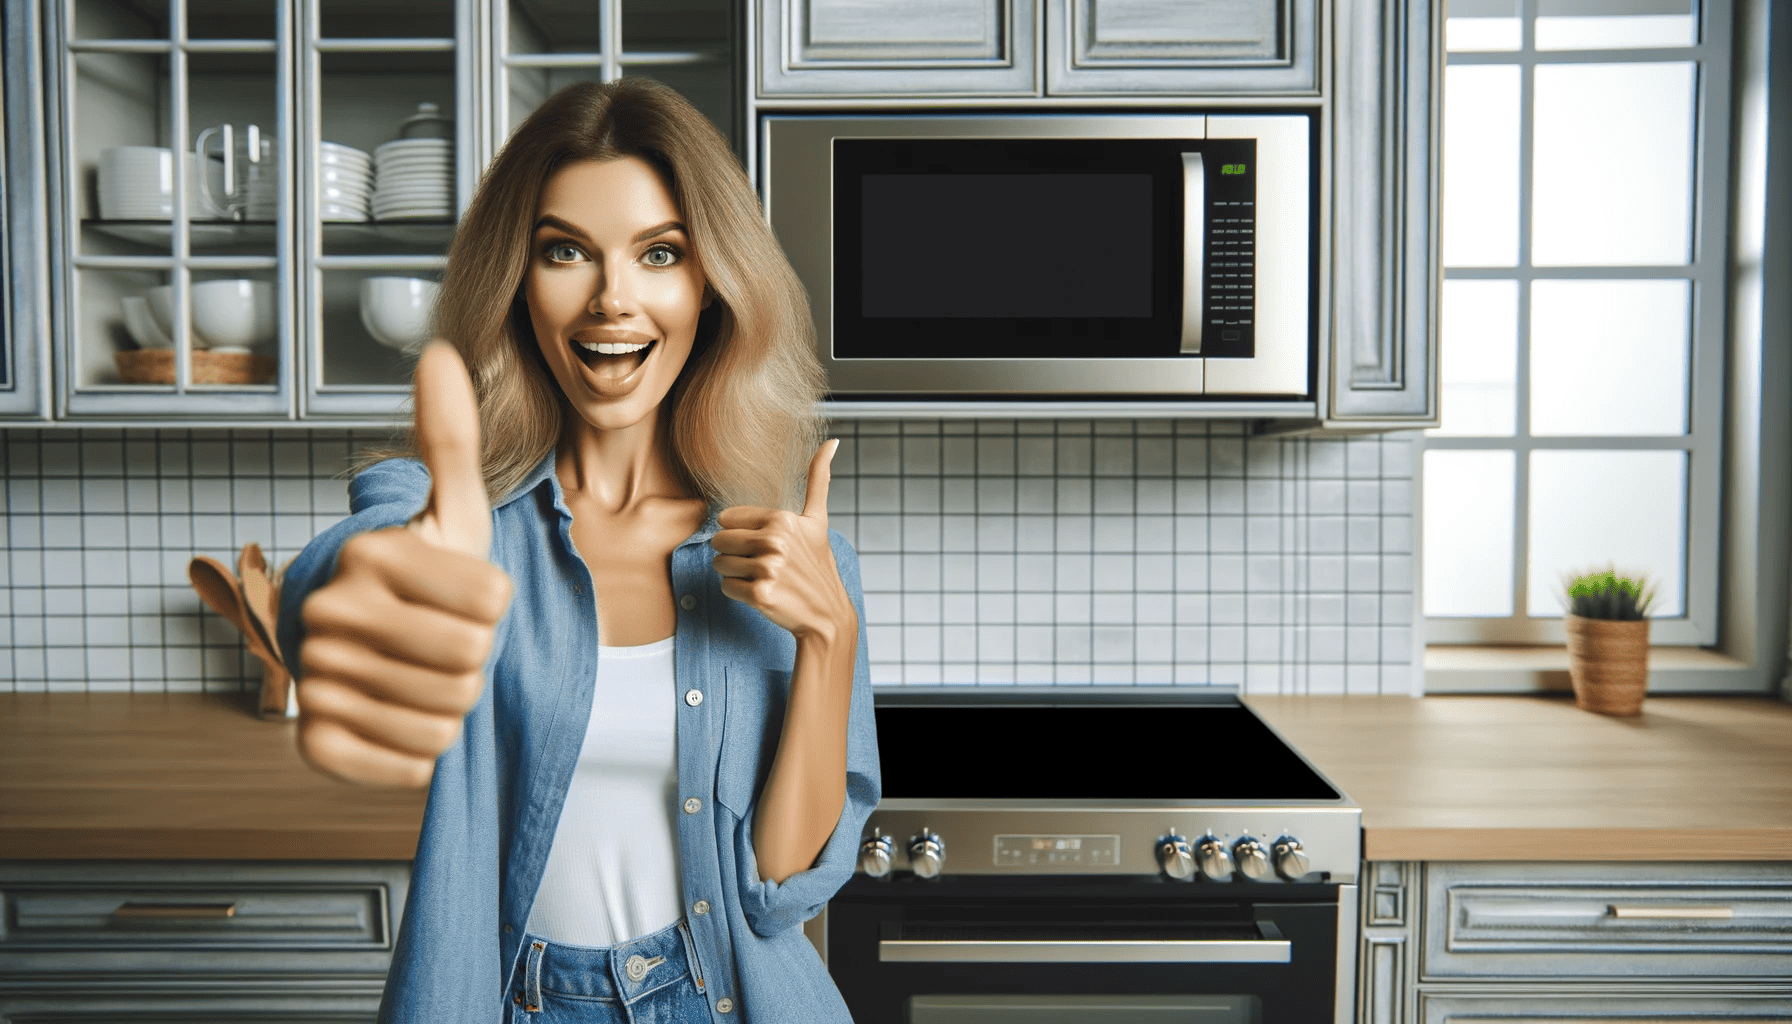 Discover the efficiency and style of Over-the-Range Microwaves. These kitchen game-changers offer space-saving designs, advanced cooking features, and a sleek look to modernize any home. Learn how they can transform your kitchen experience.